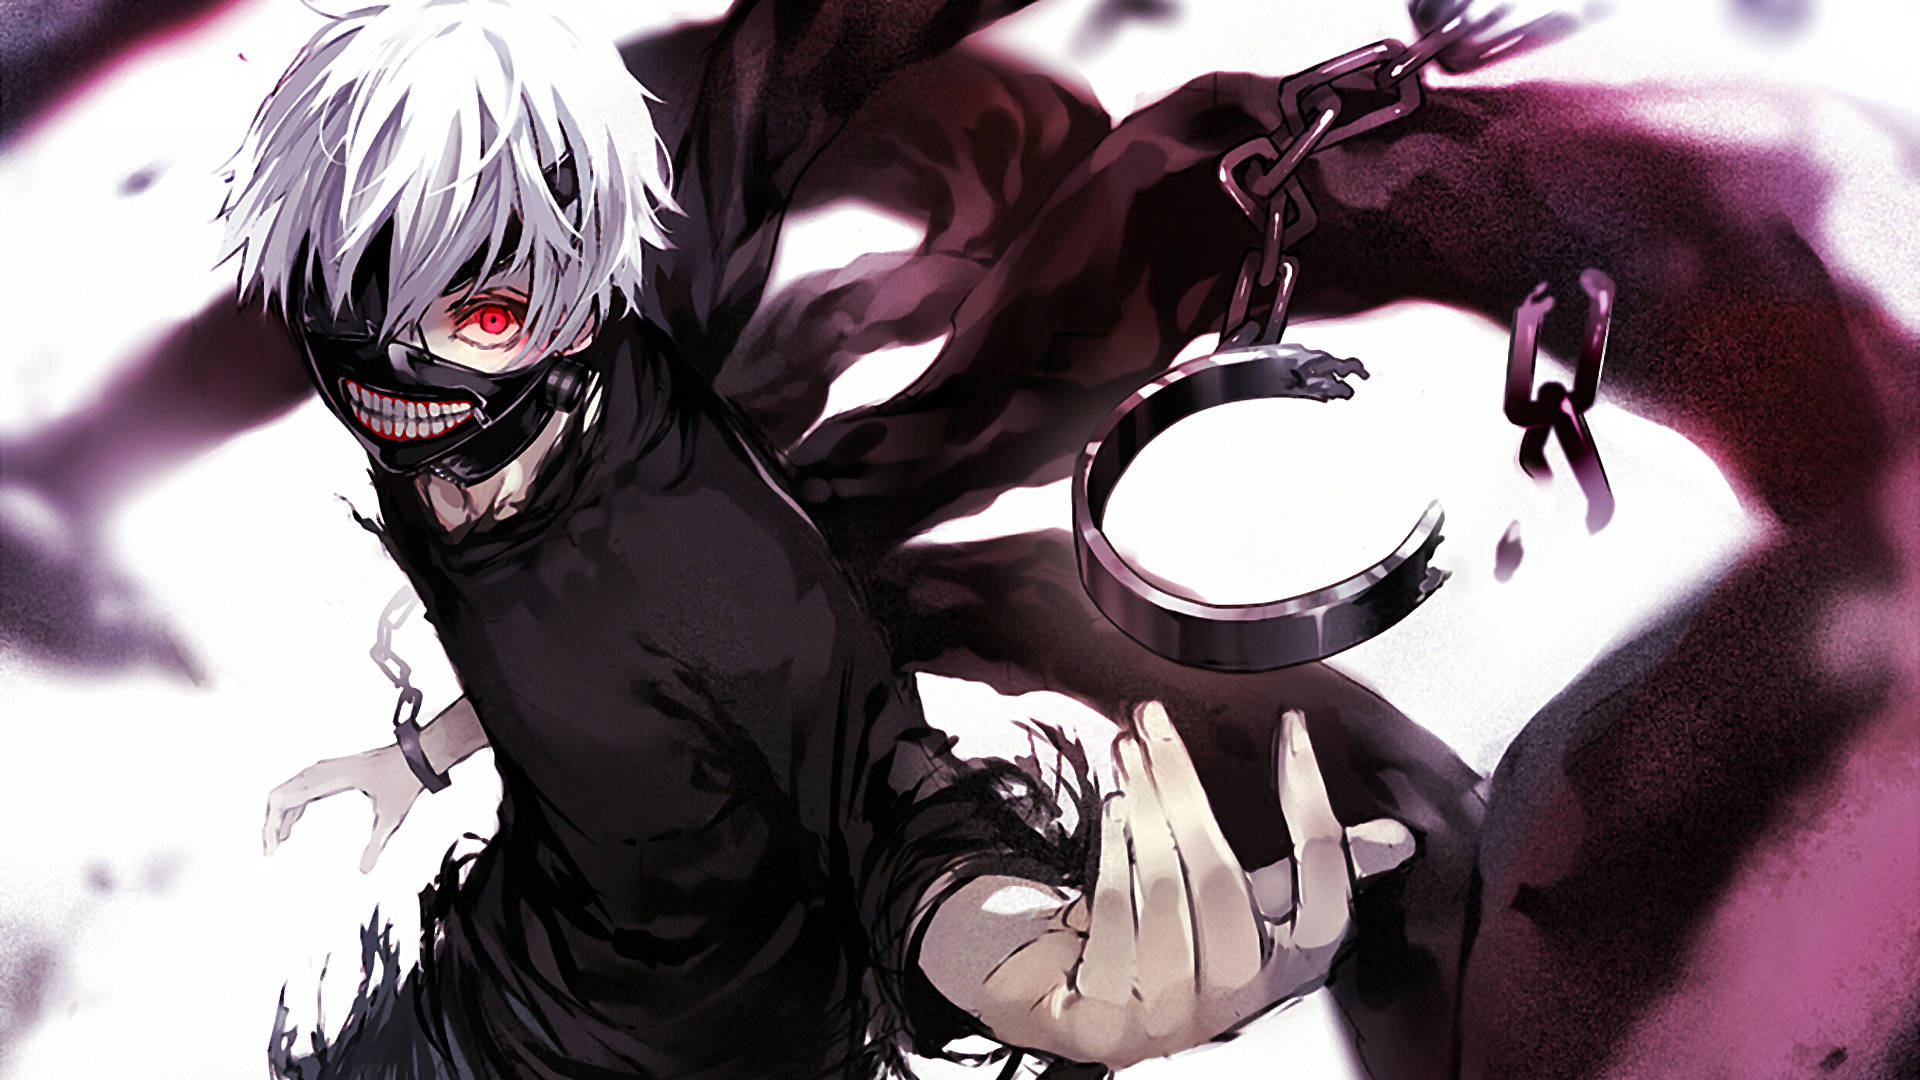 Tokyo Ghoul Aesthetic With Ken Breaking Chains Wallpaper